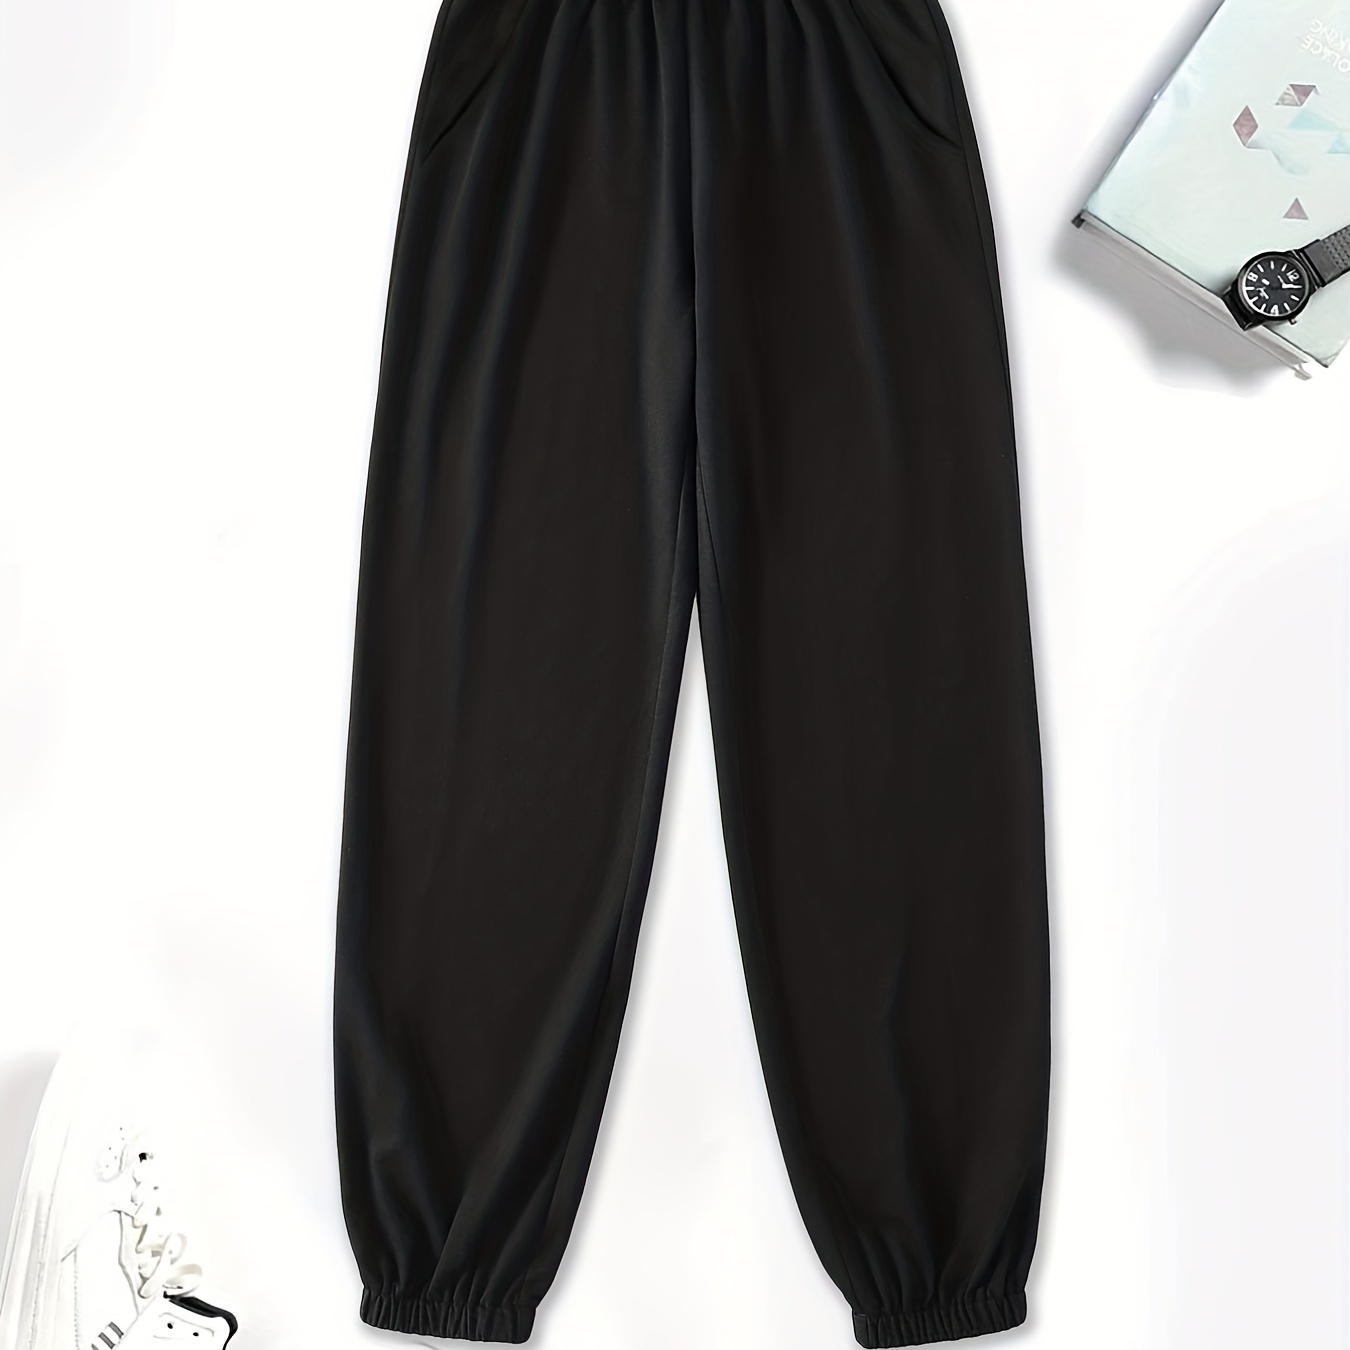 

Basic Plain Sweatpants For Girls High Waisted Workout Active Joggers Pants, Relaxed Fit & Street Style